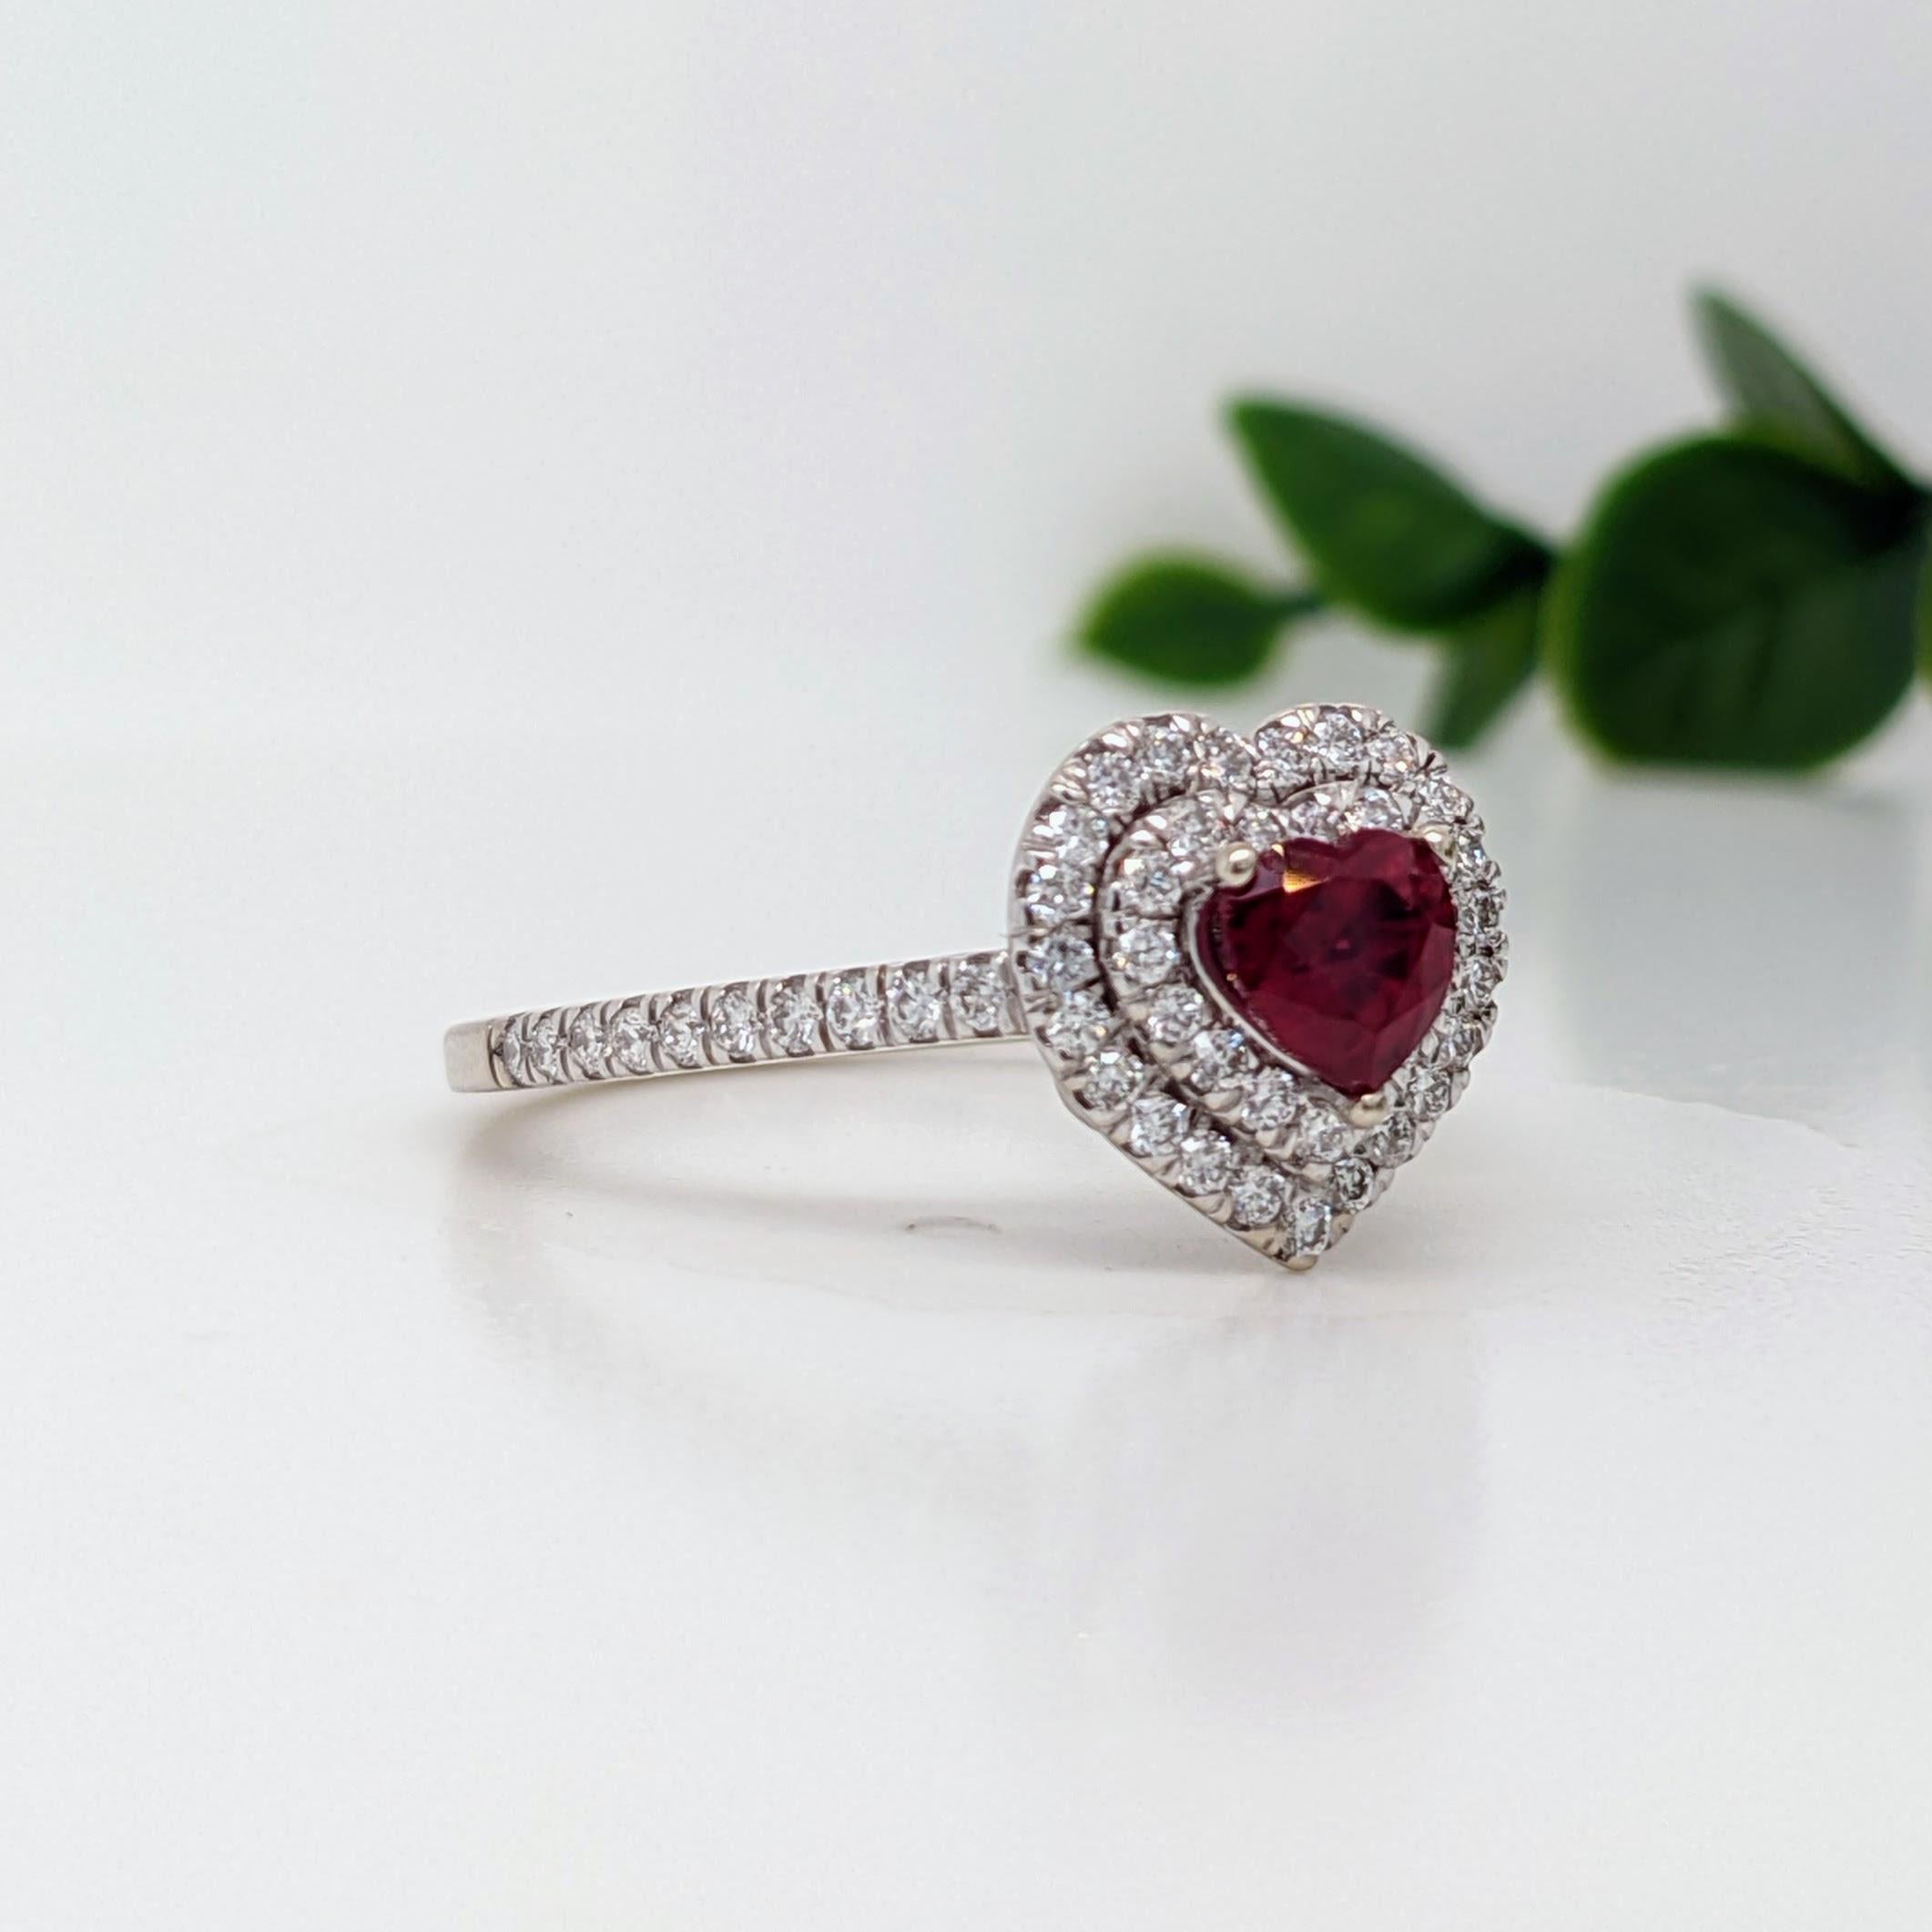 Celebrate love on all occasions with this vintage style diamond ring featuring a gorgeous pigeon-blood red ruby from Burma, framed by a heart-shaped double halo with natural earth-mined diamonds and a pave diamond studded shank. This design is